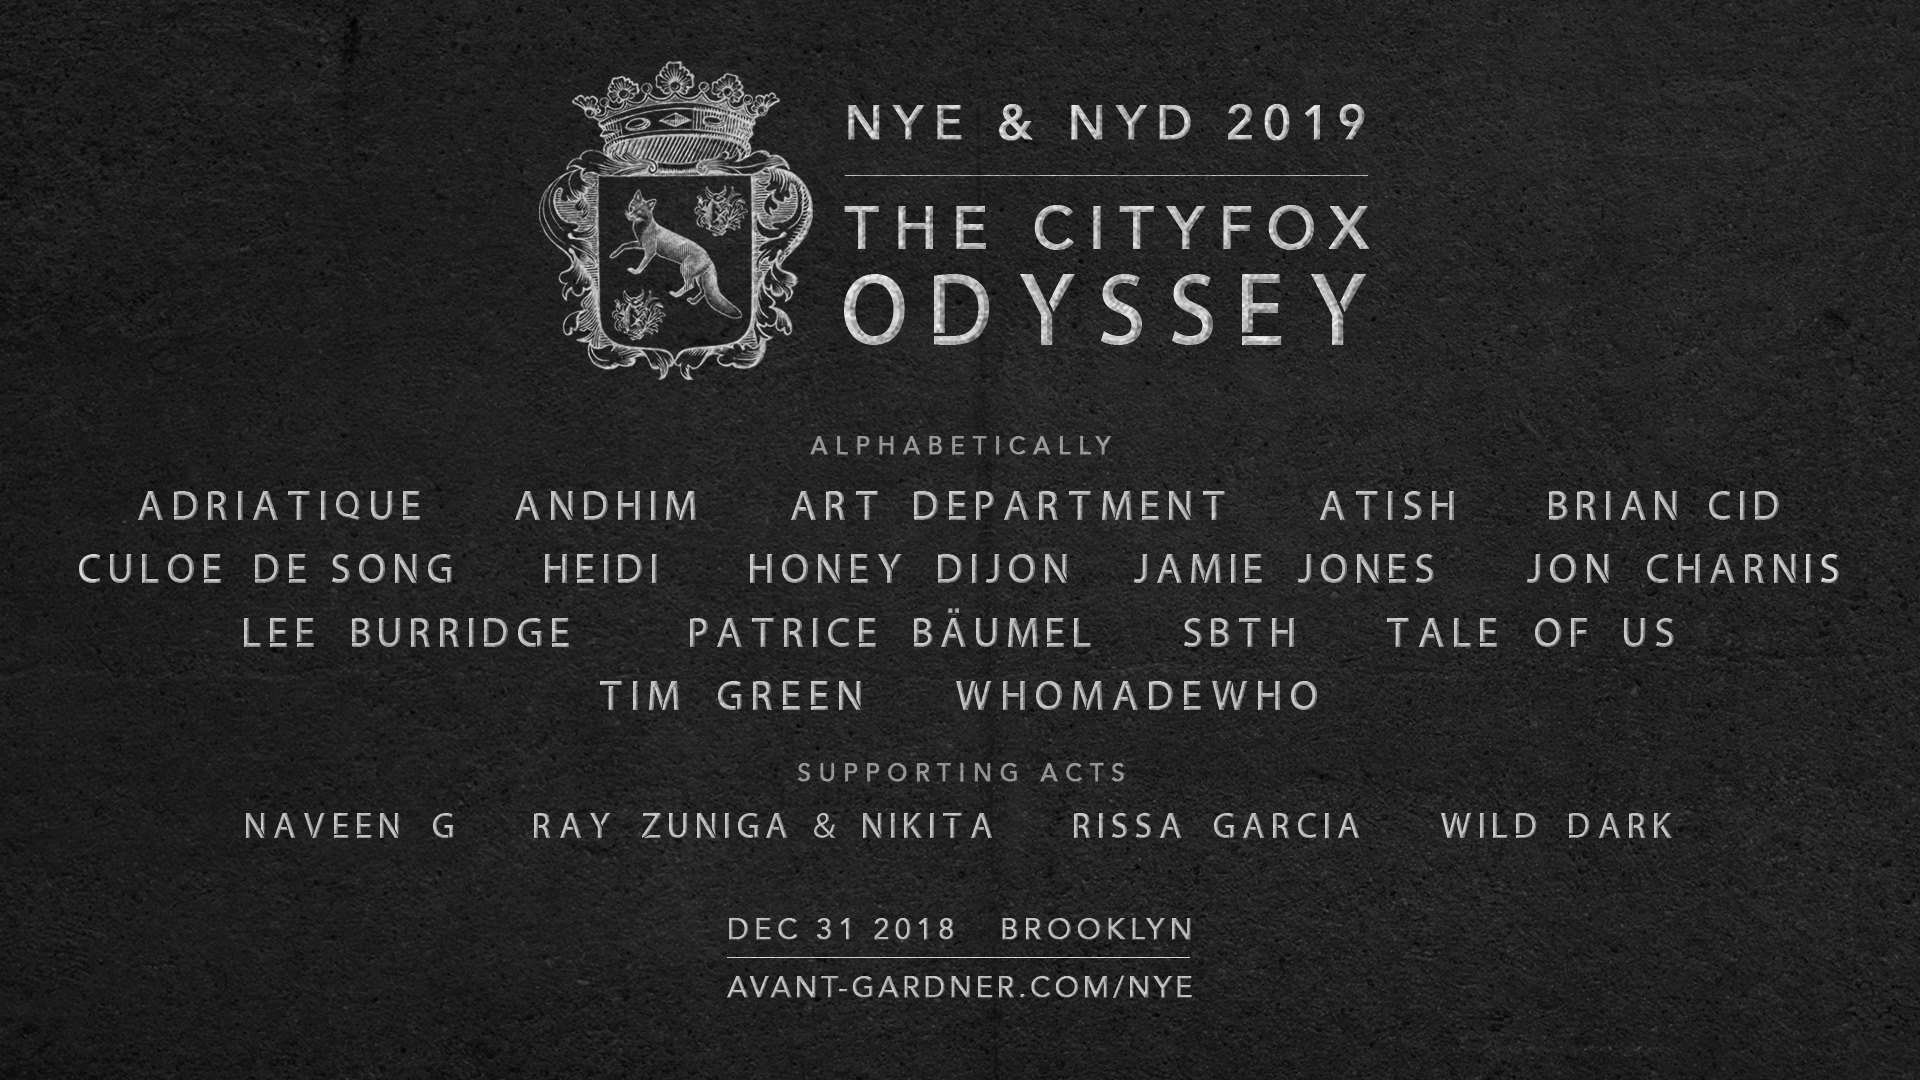 The Cityfox Odyssey: NYE & NYD 2019 Lineup